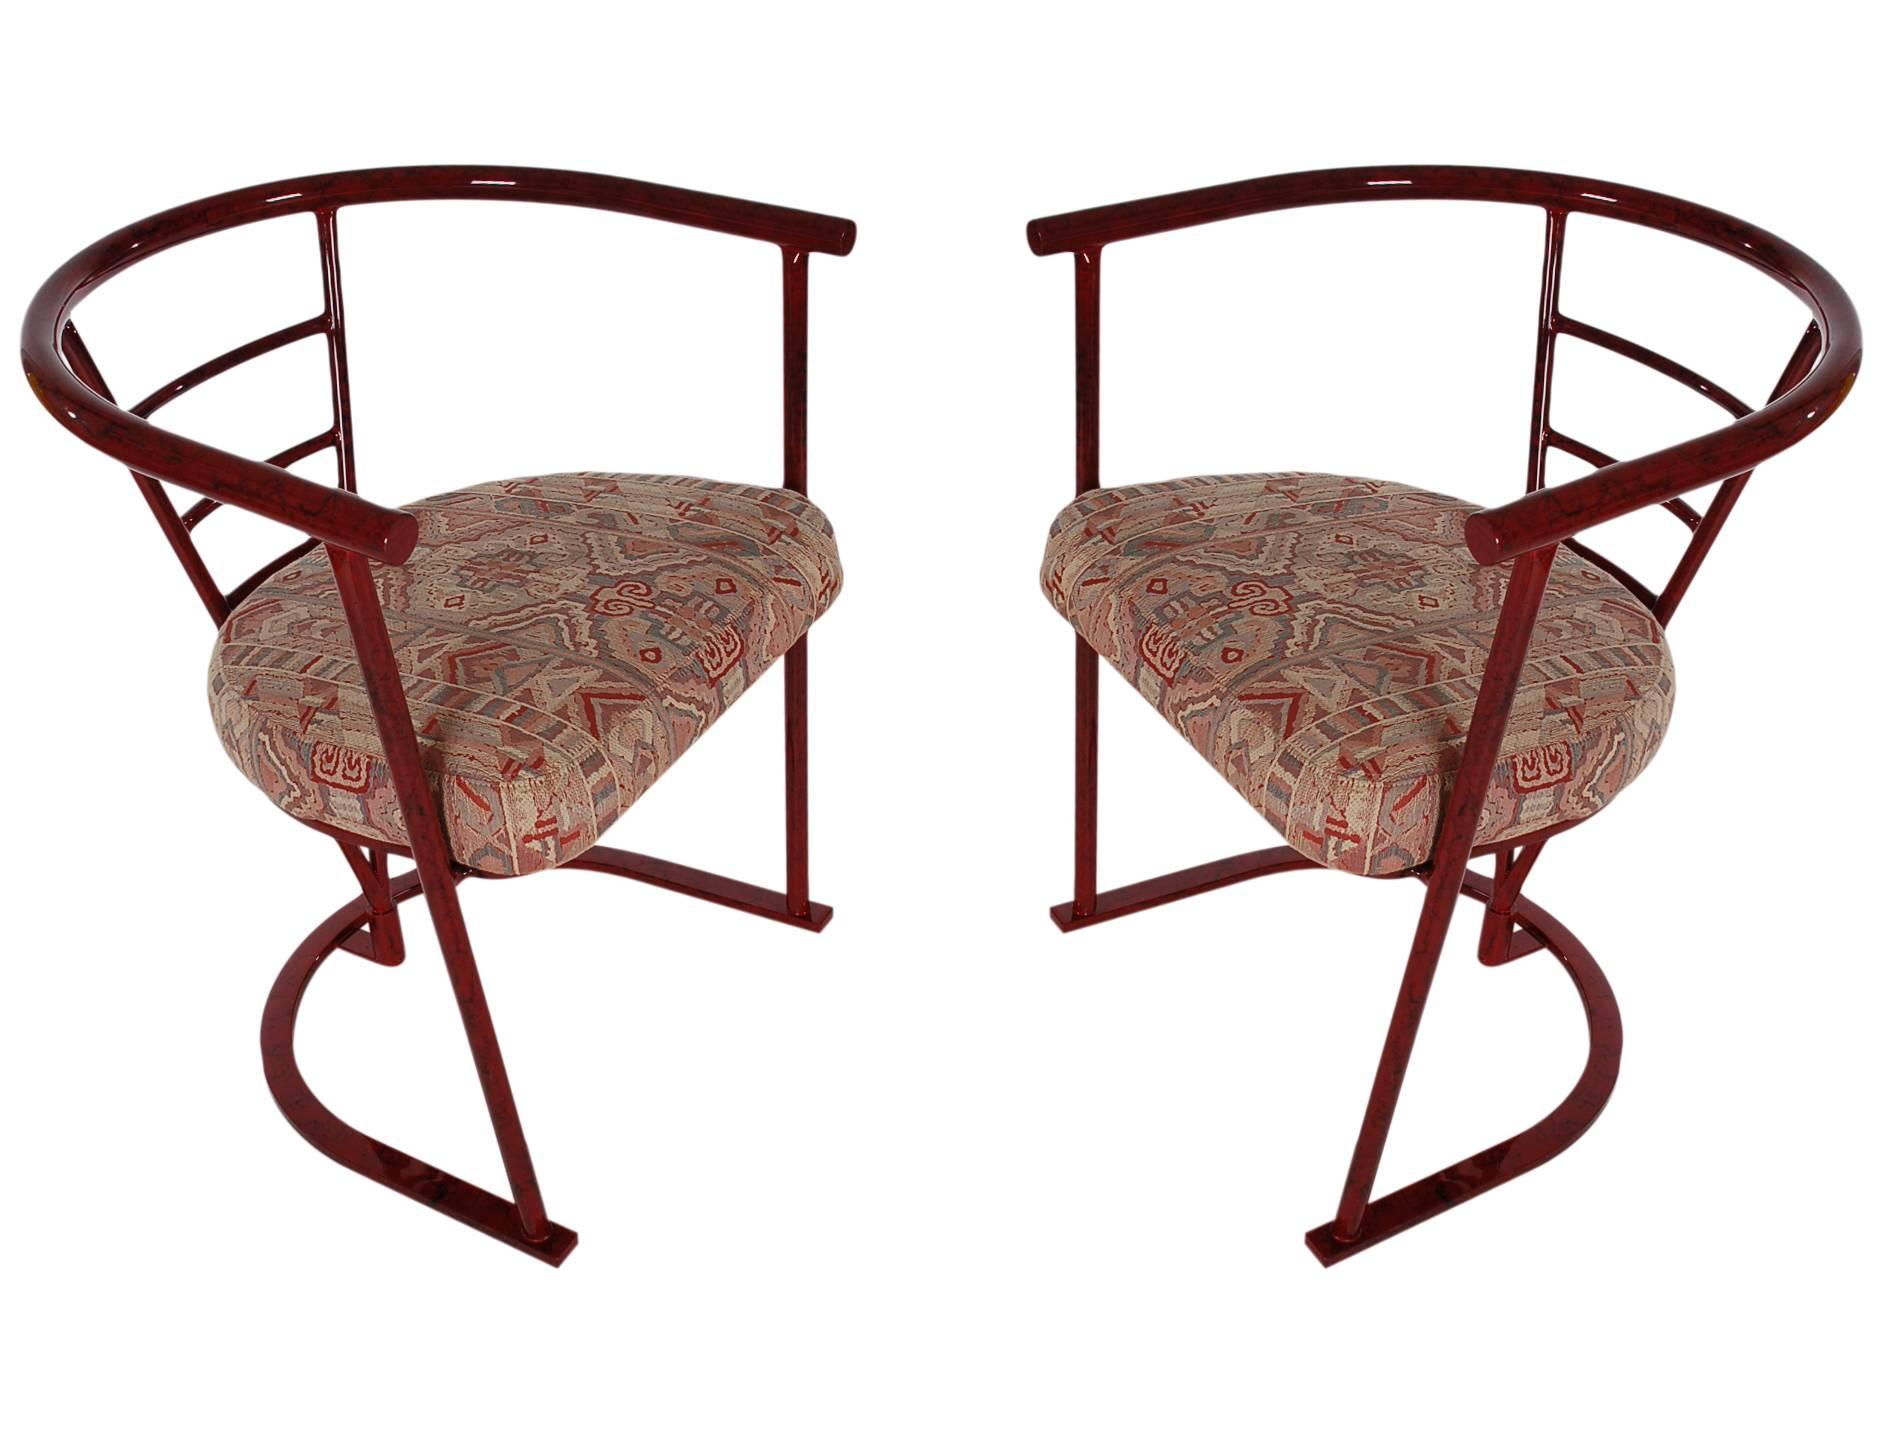 Post-Modern Midcentury Post Modern Italian Style Dining Chairs After Sottsass for Memphis